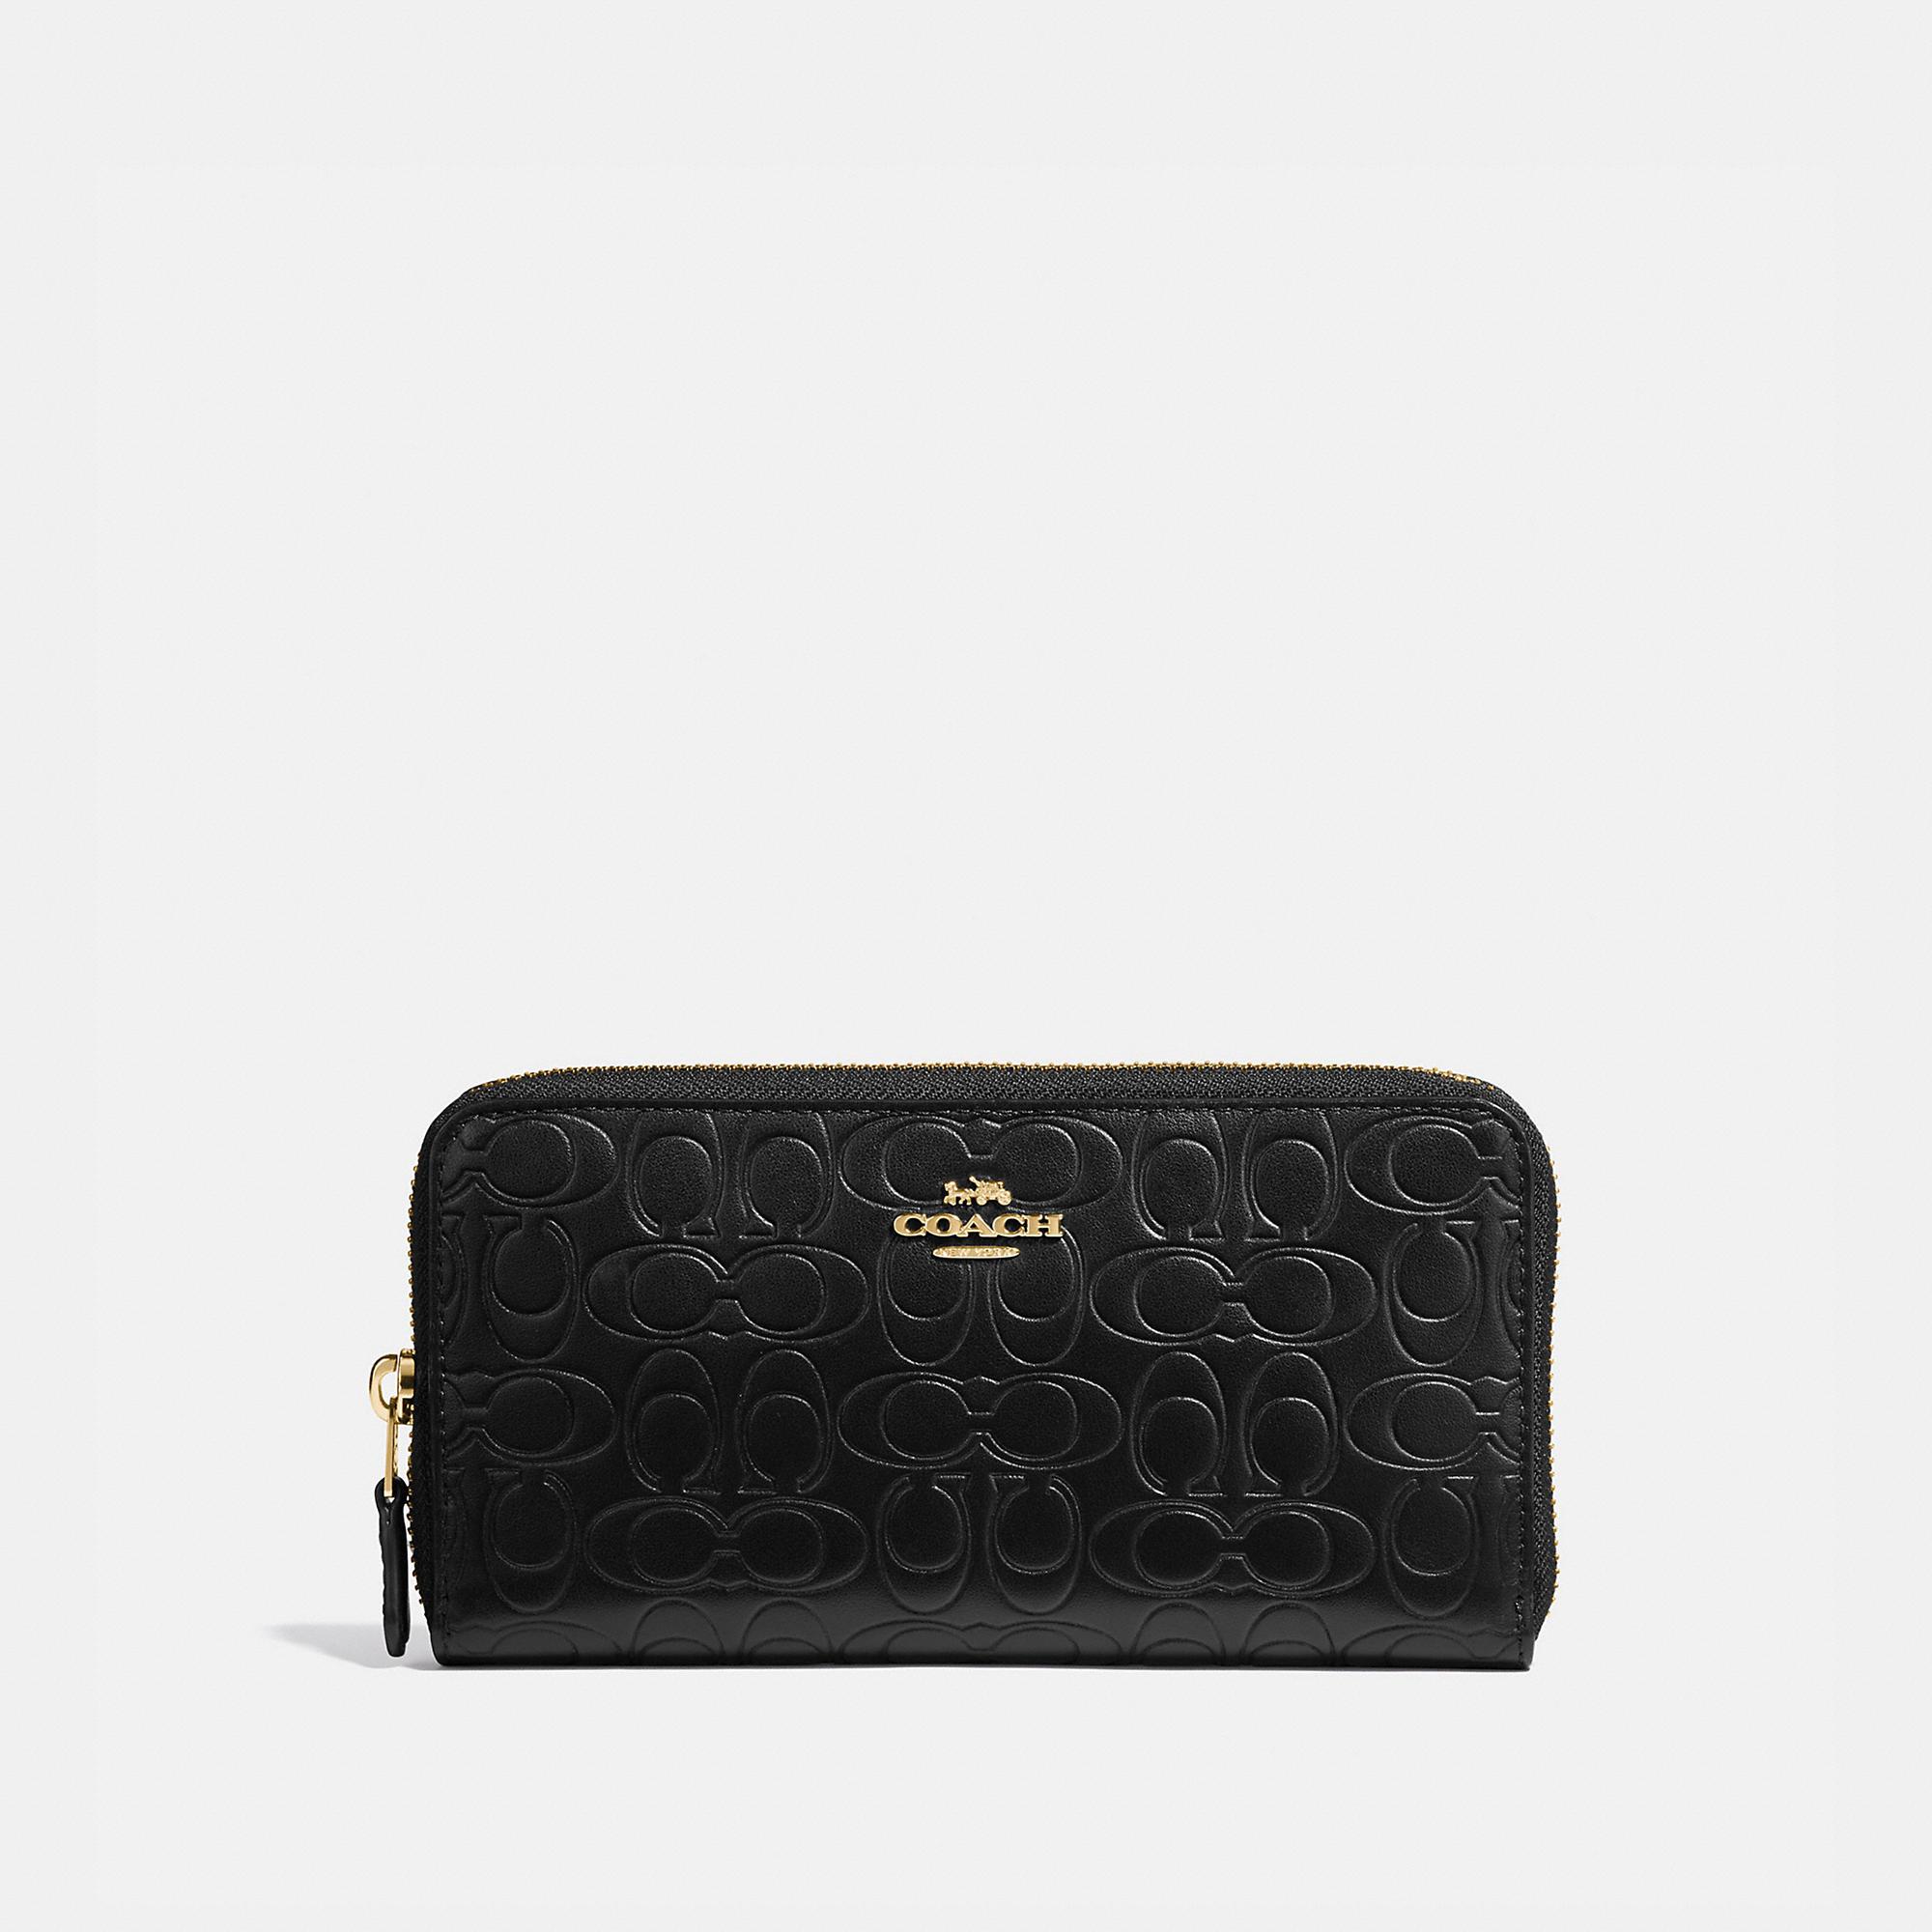 COACH Accordion Zip Wallet In Signature Leather in Black | Lyst